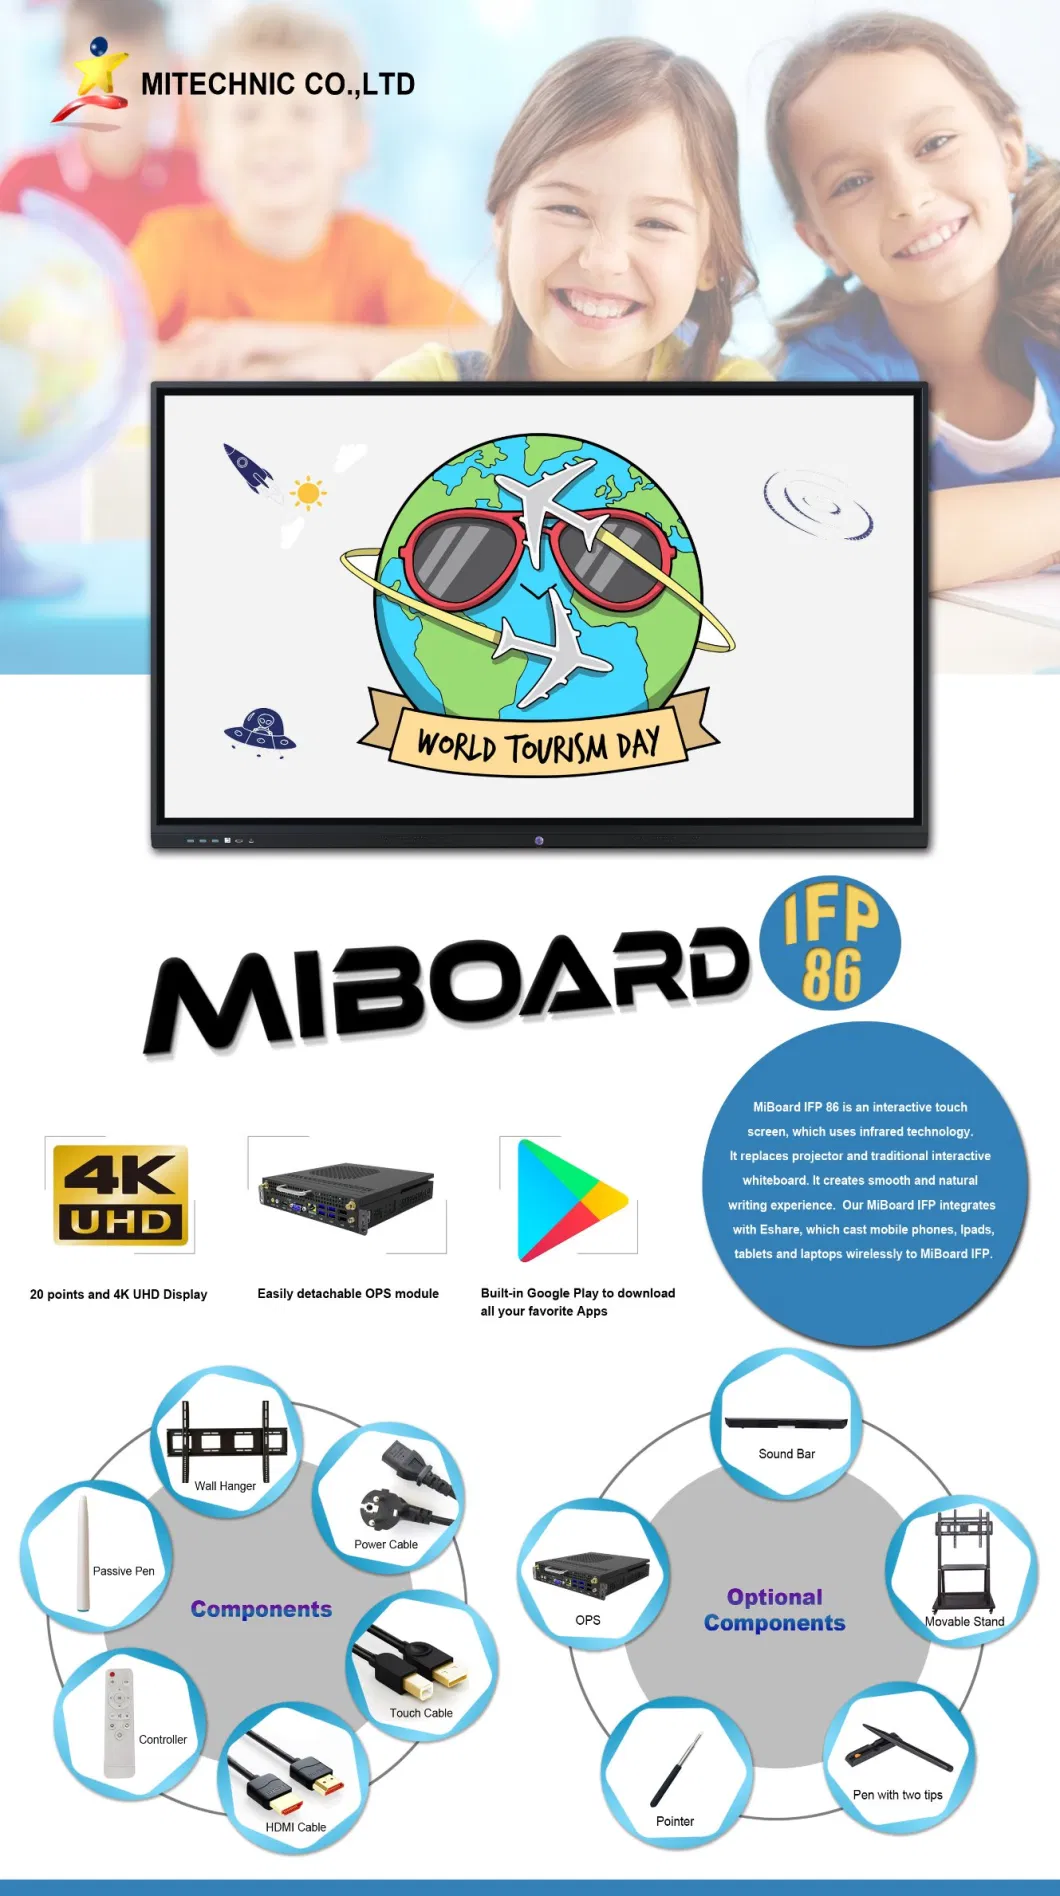 Miboard 75 Inch Display Touch Screen Flat Panel 4K UHD Smart Portable Electronic Whiteboard Interactive White Board for School